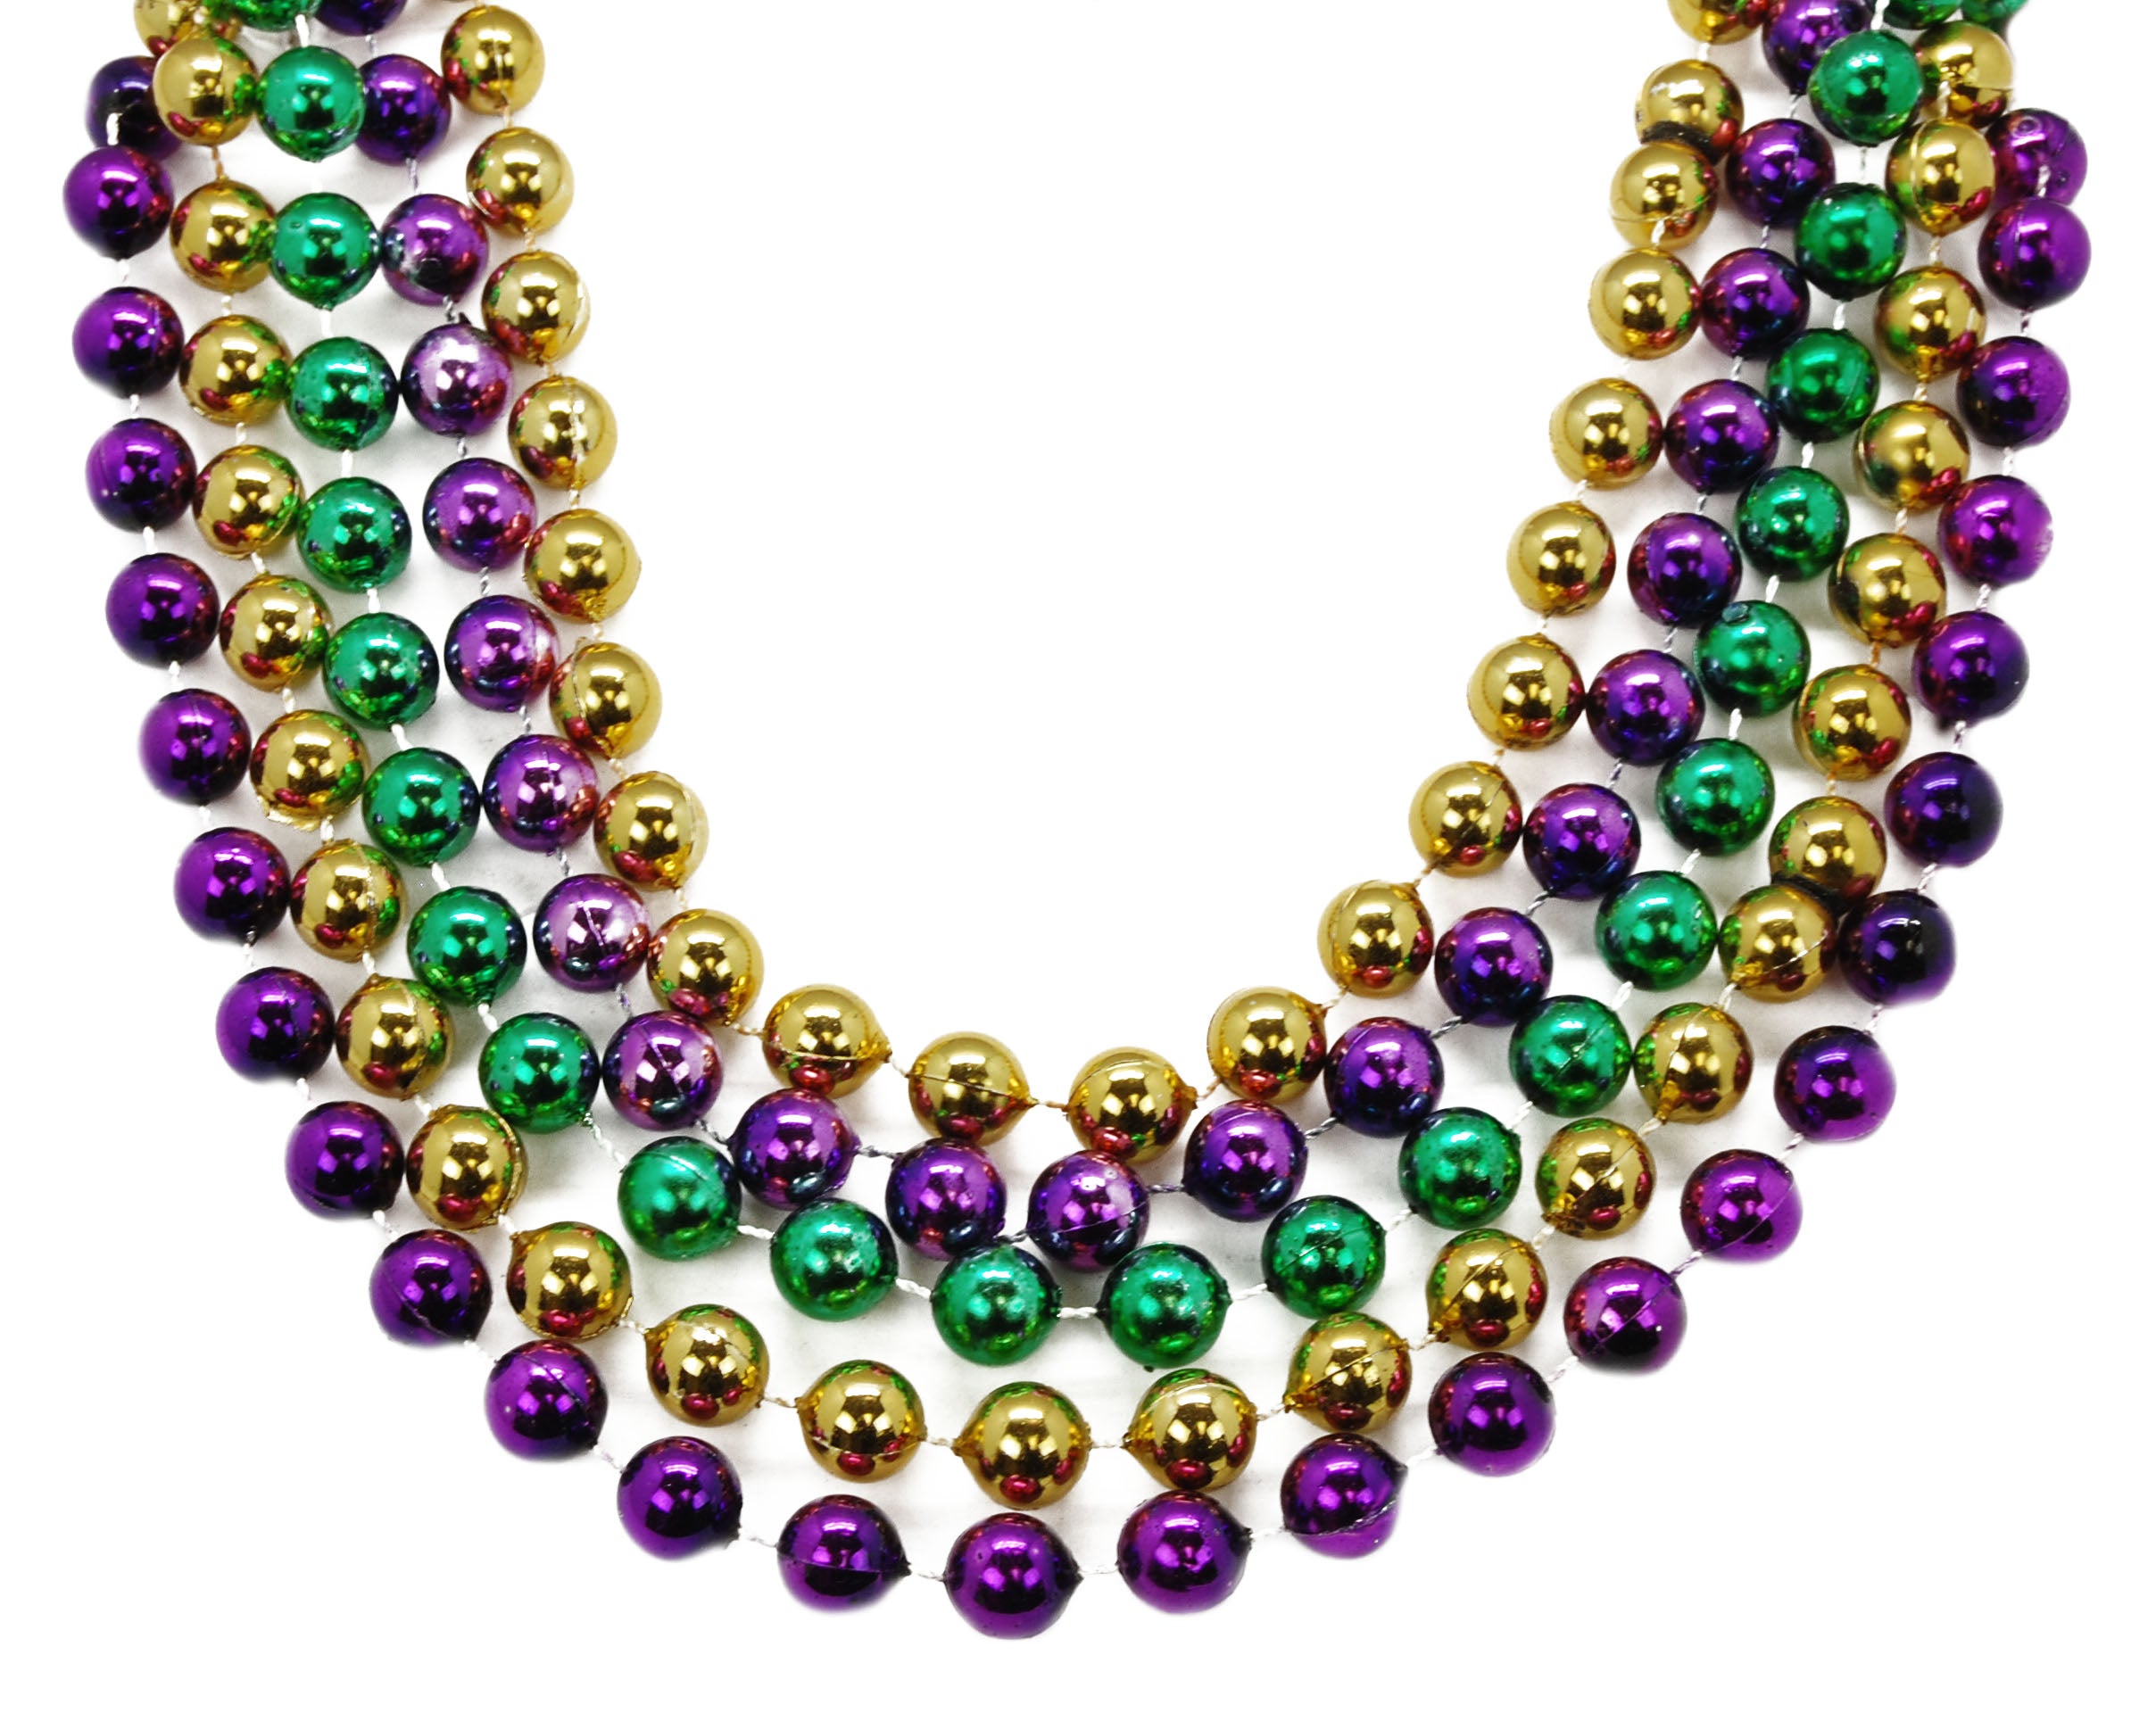 33 7mm Global Beads Assorted Colors